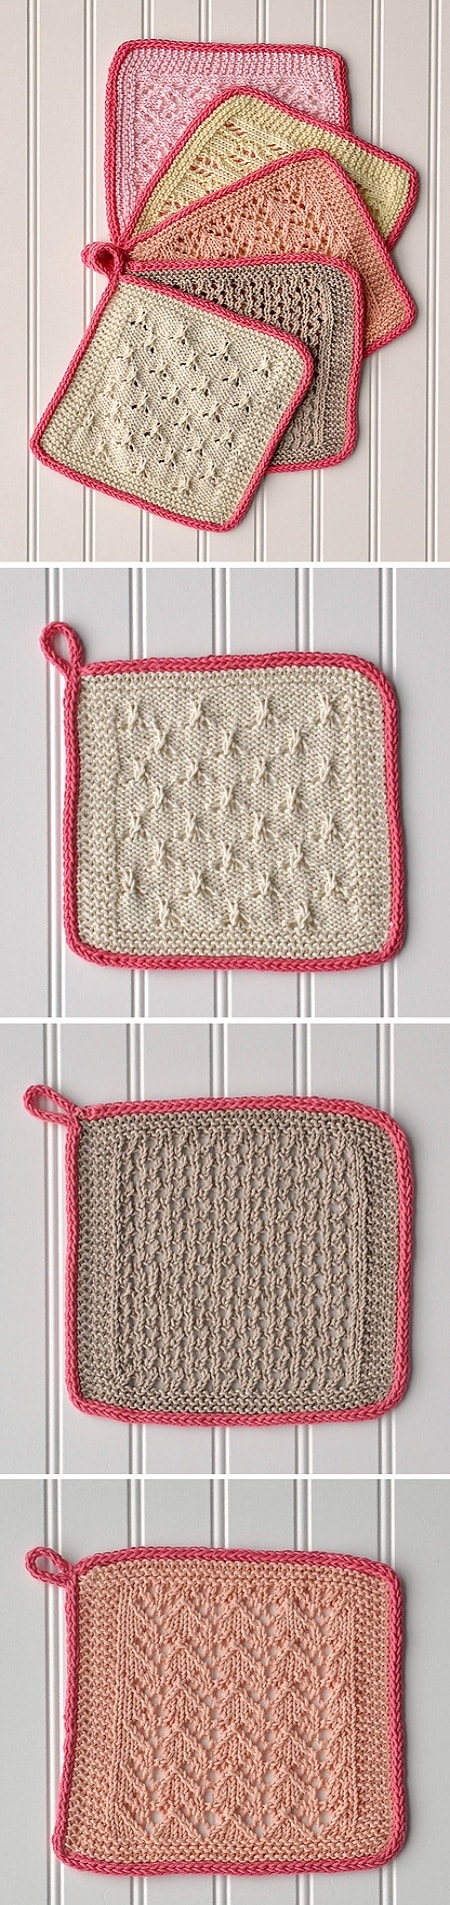 It's easy to knit a dishcloth or washcloth and they are a great treat for you. They stitch up so fast.